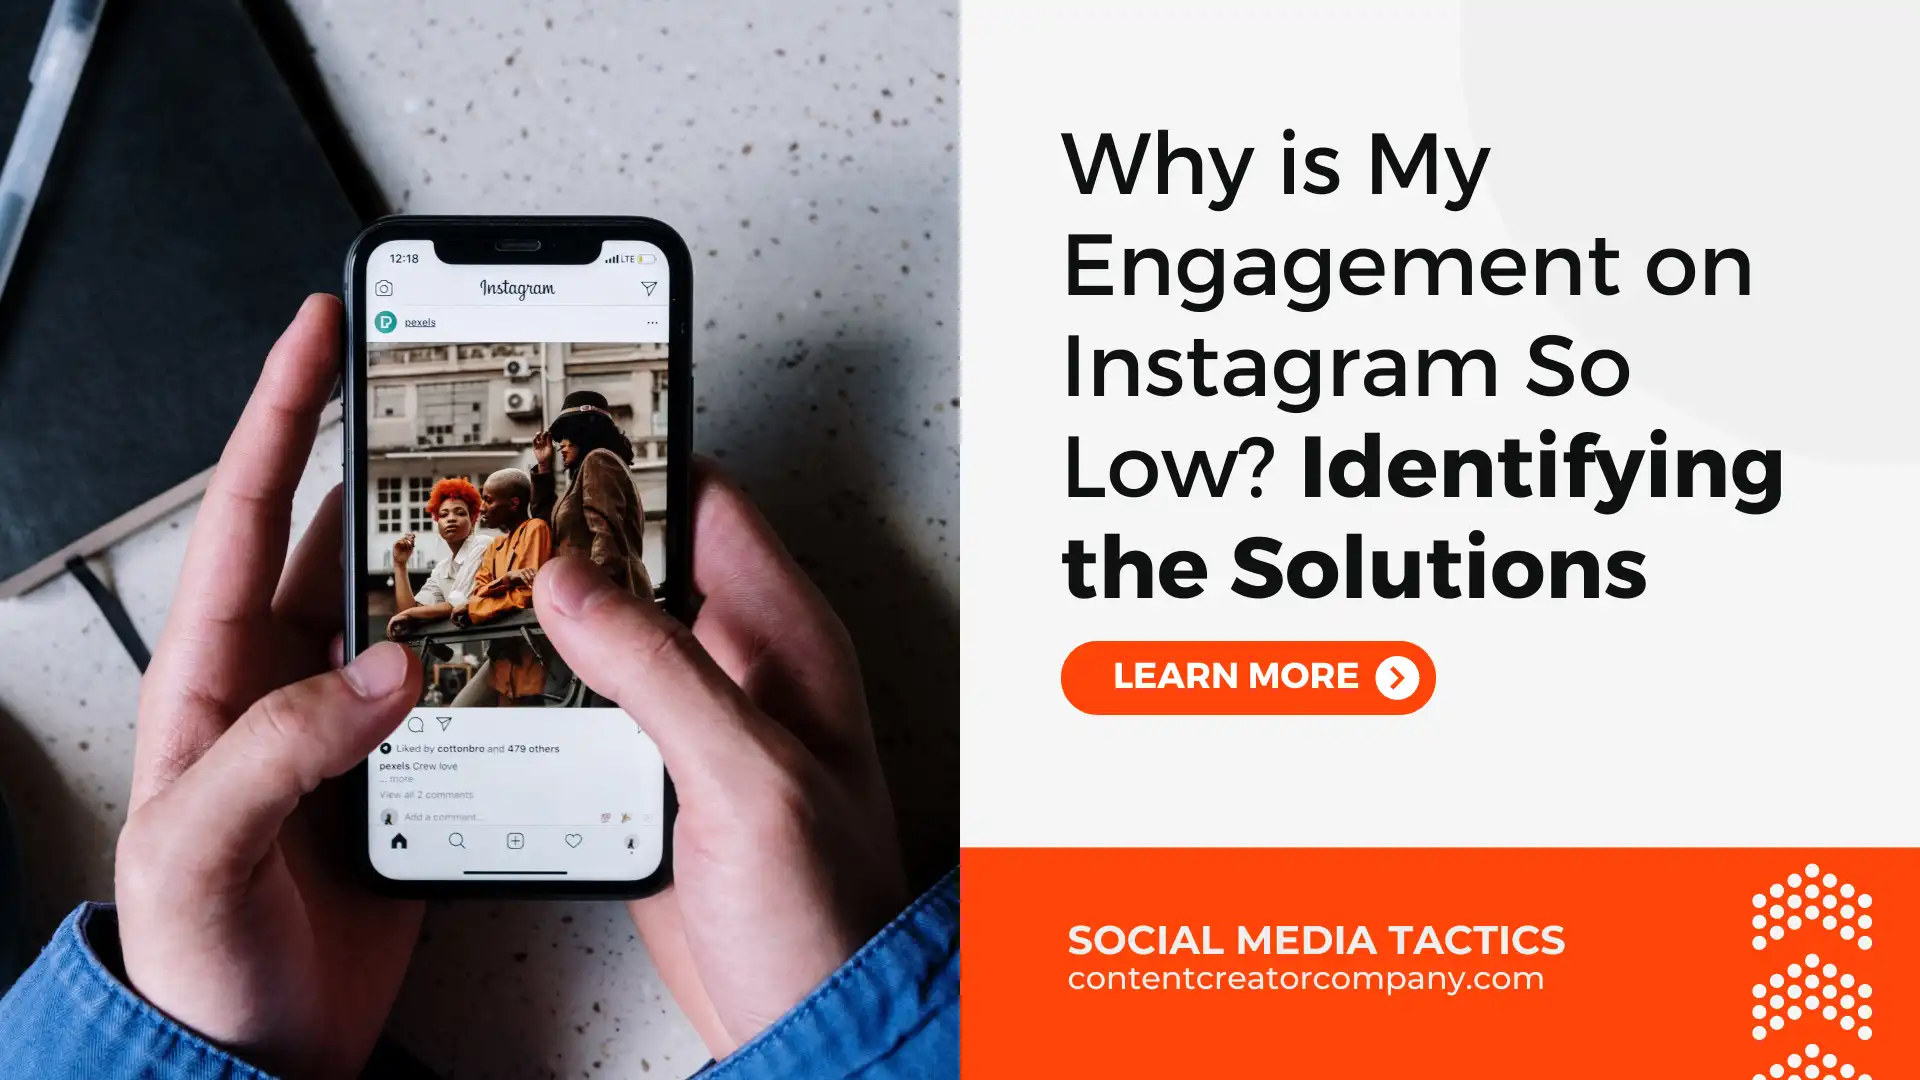 Why is My Engagement on Instagram So Low? Identifying the Solutions